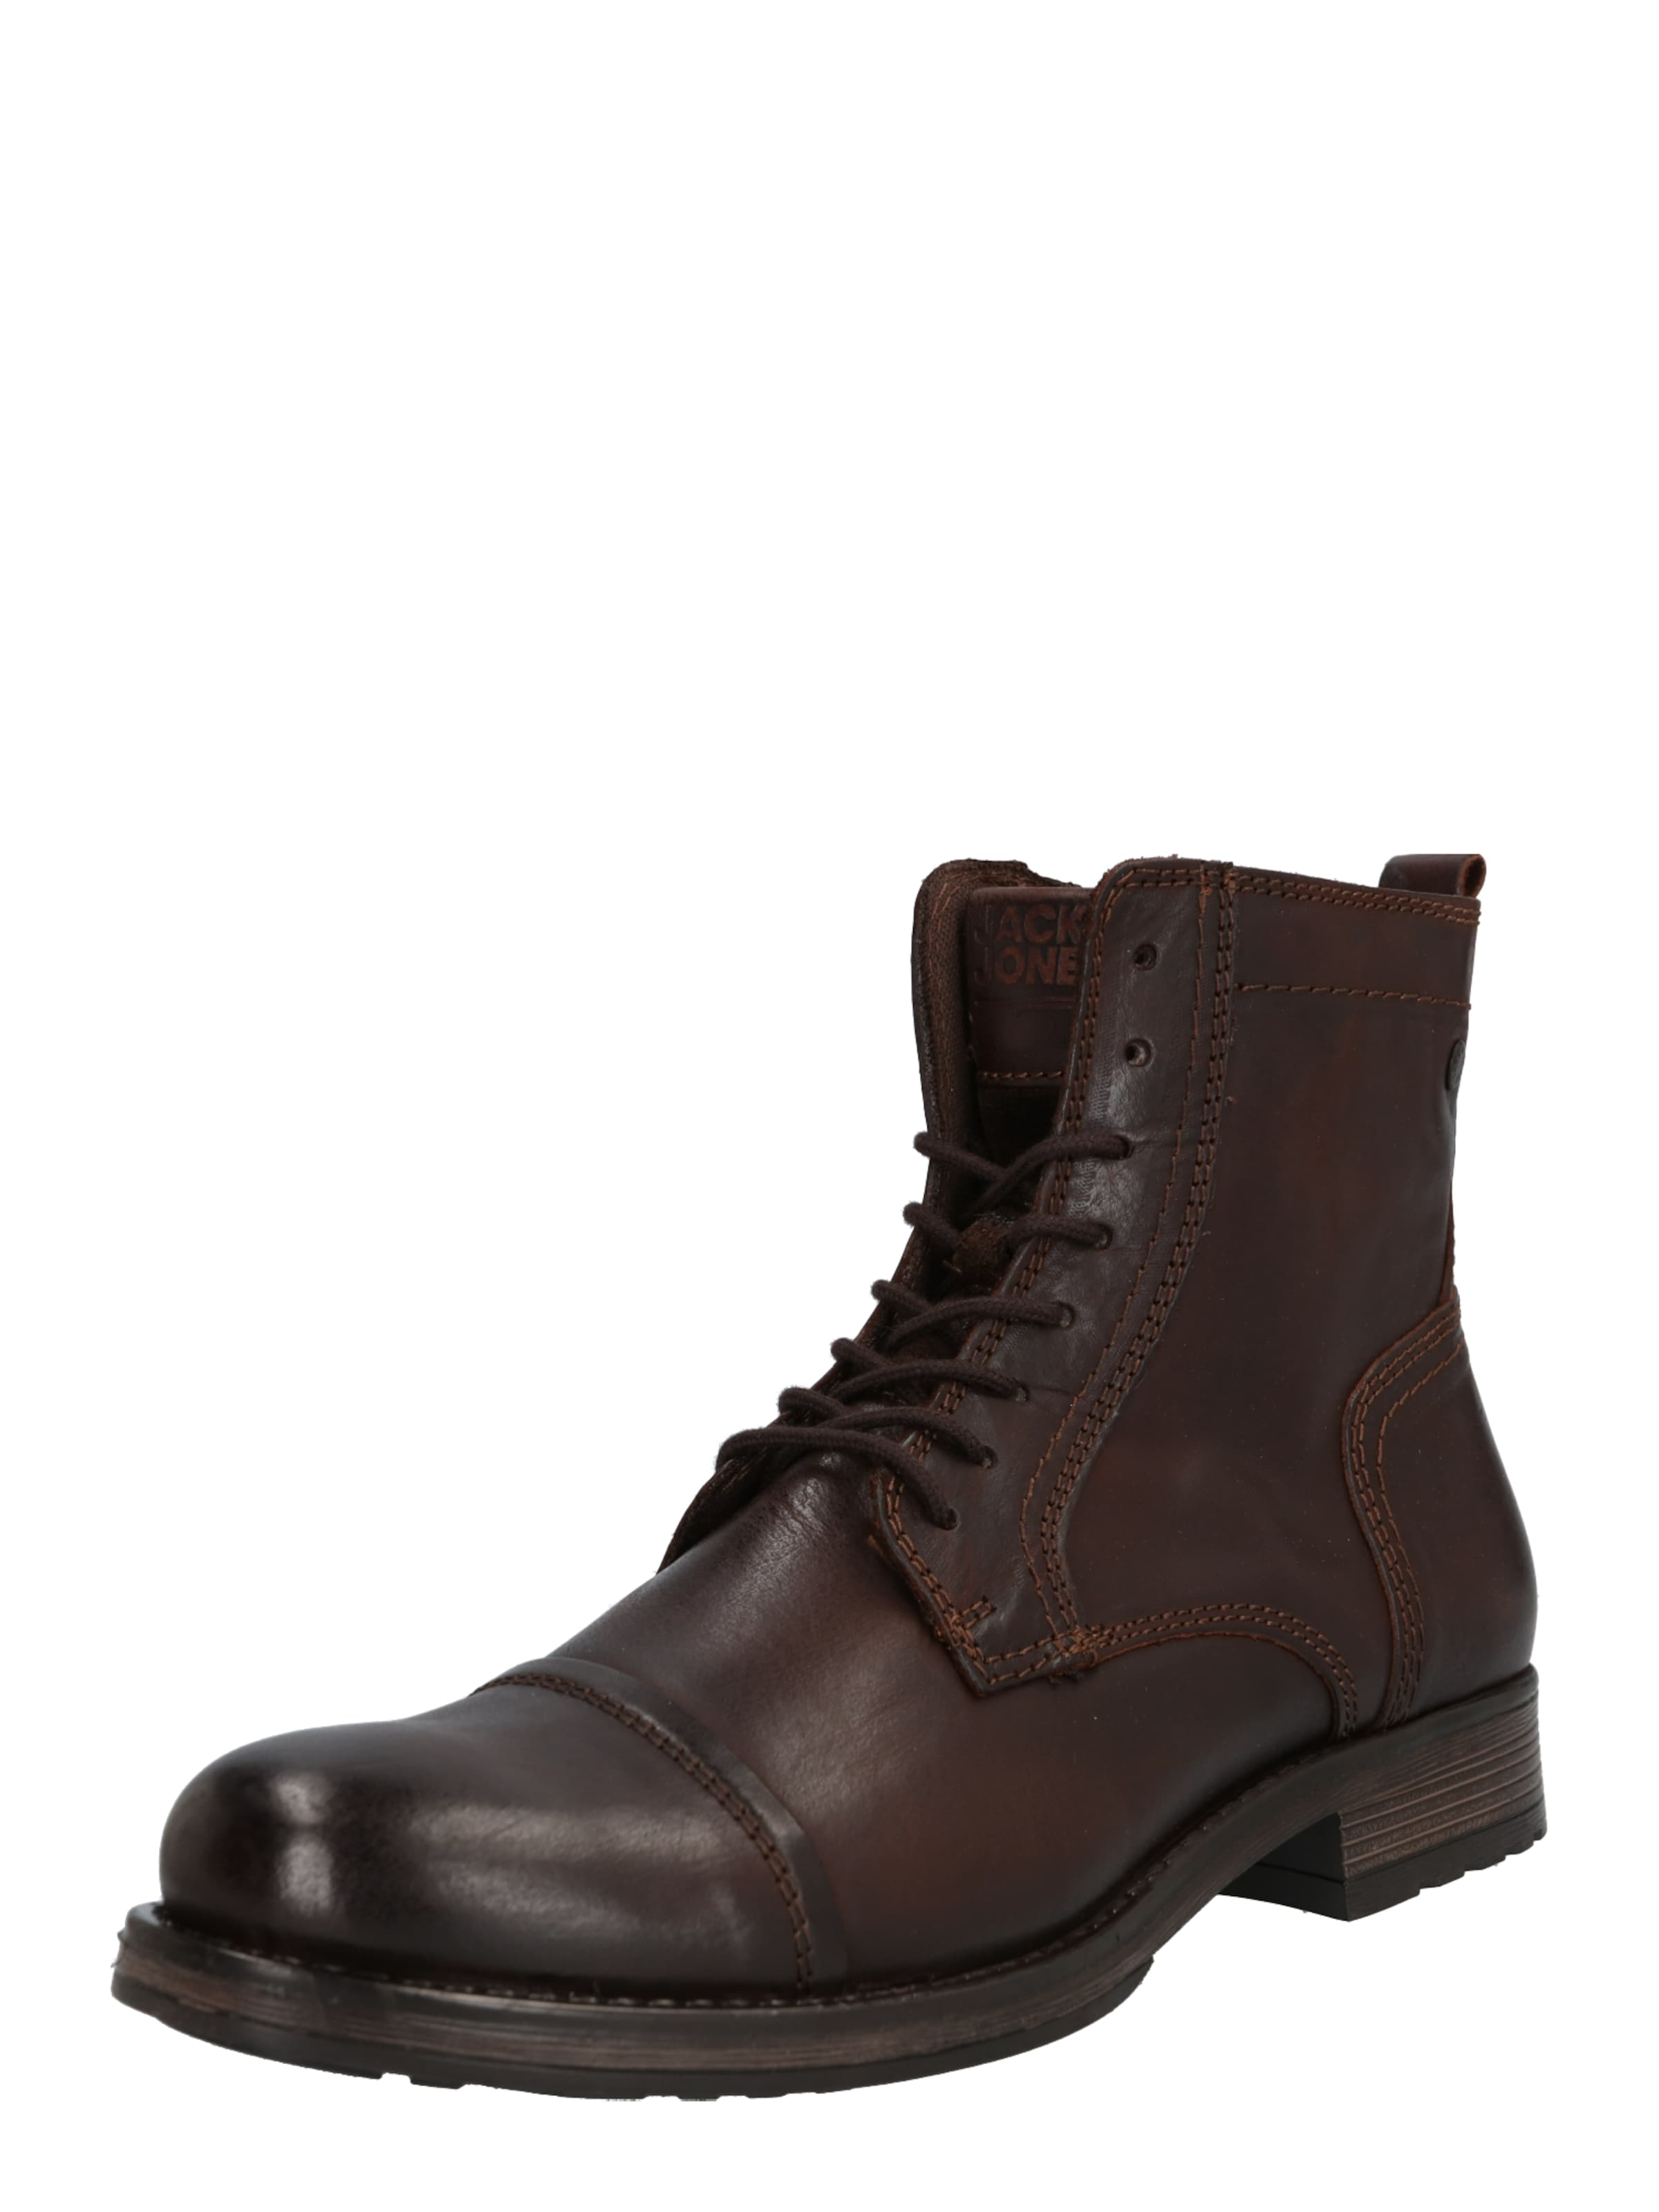 Men Boots | JACK & JONES Lace-Up Boots in Chestnut Brown - YQ17761